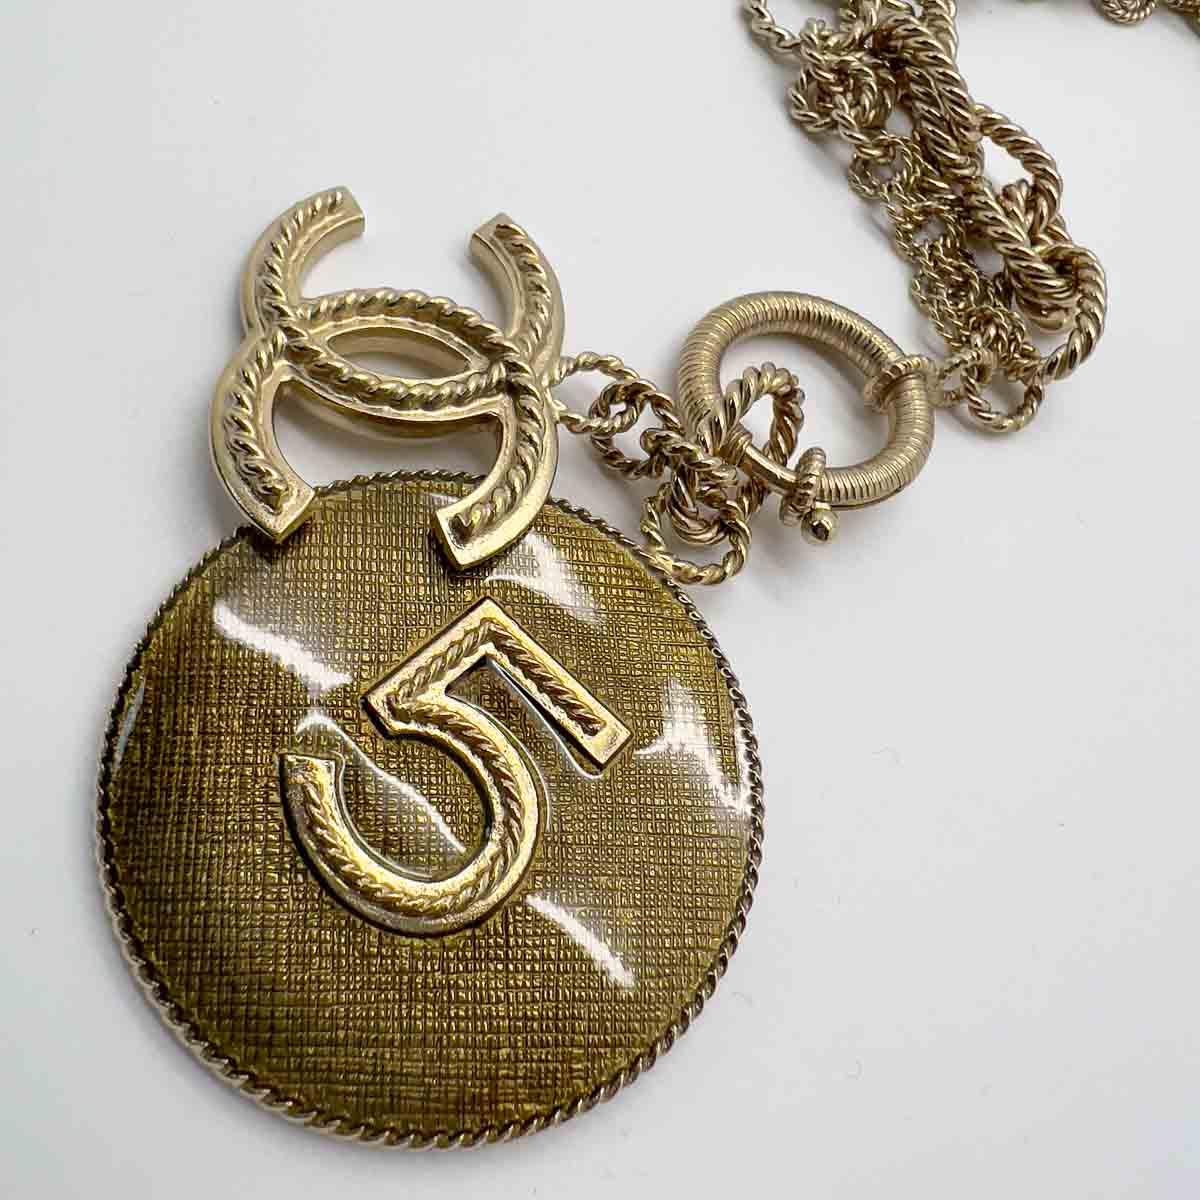 Vintage Chanel No. 5 Rope Chain Charm Necklace 2013 For Sale 2